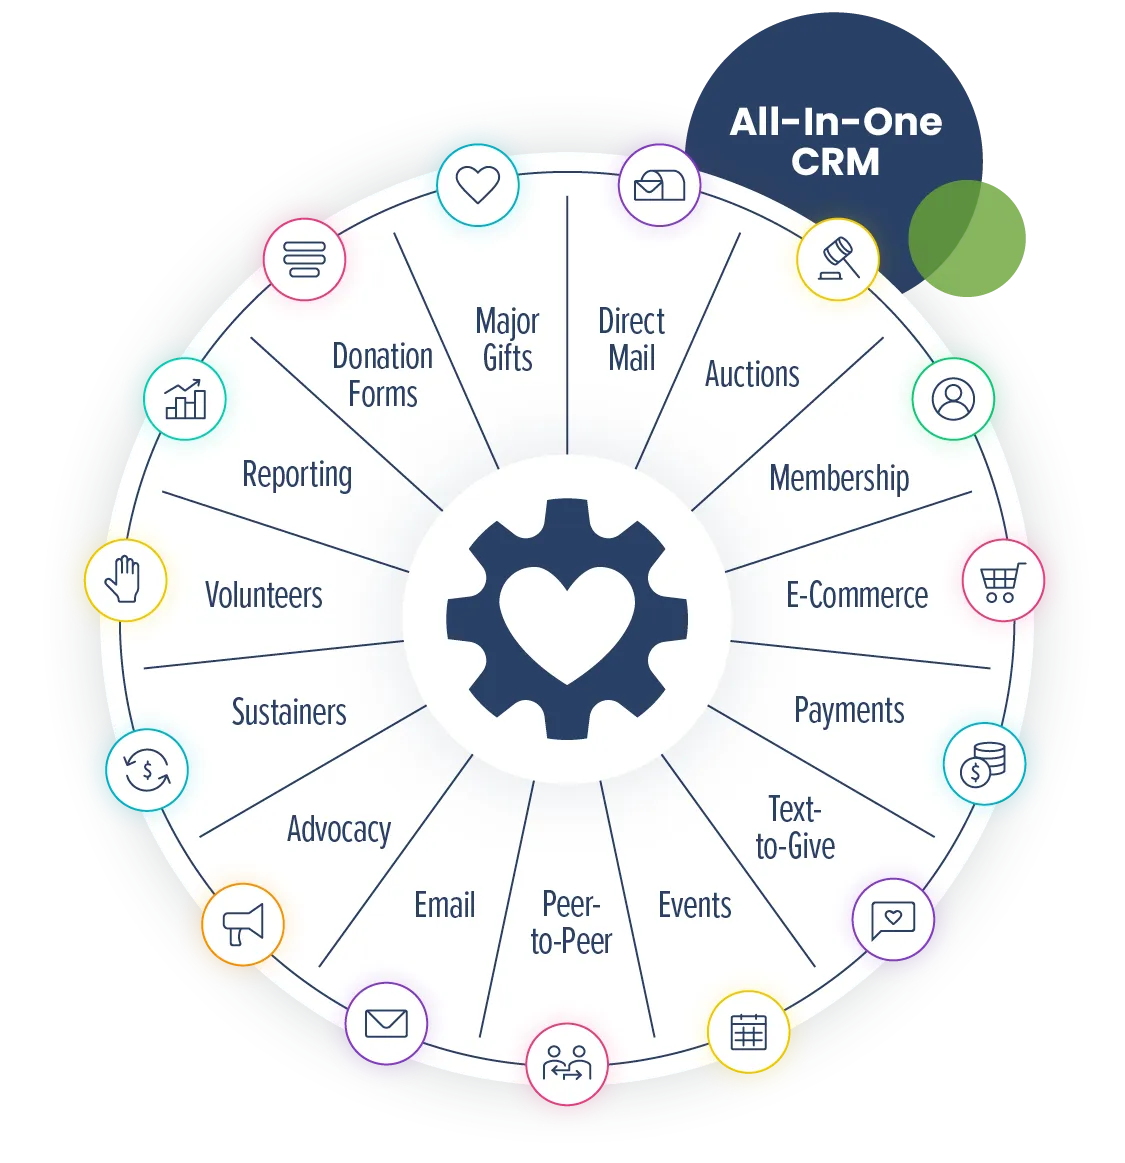 CharityEngine's All-in-One CRM